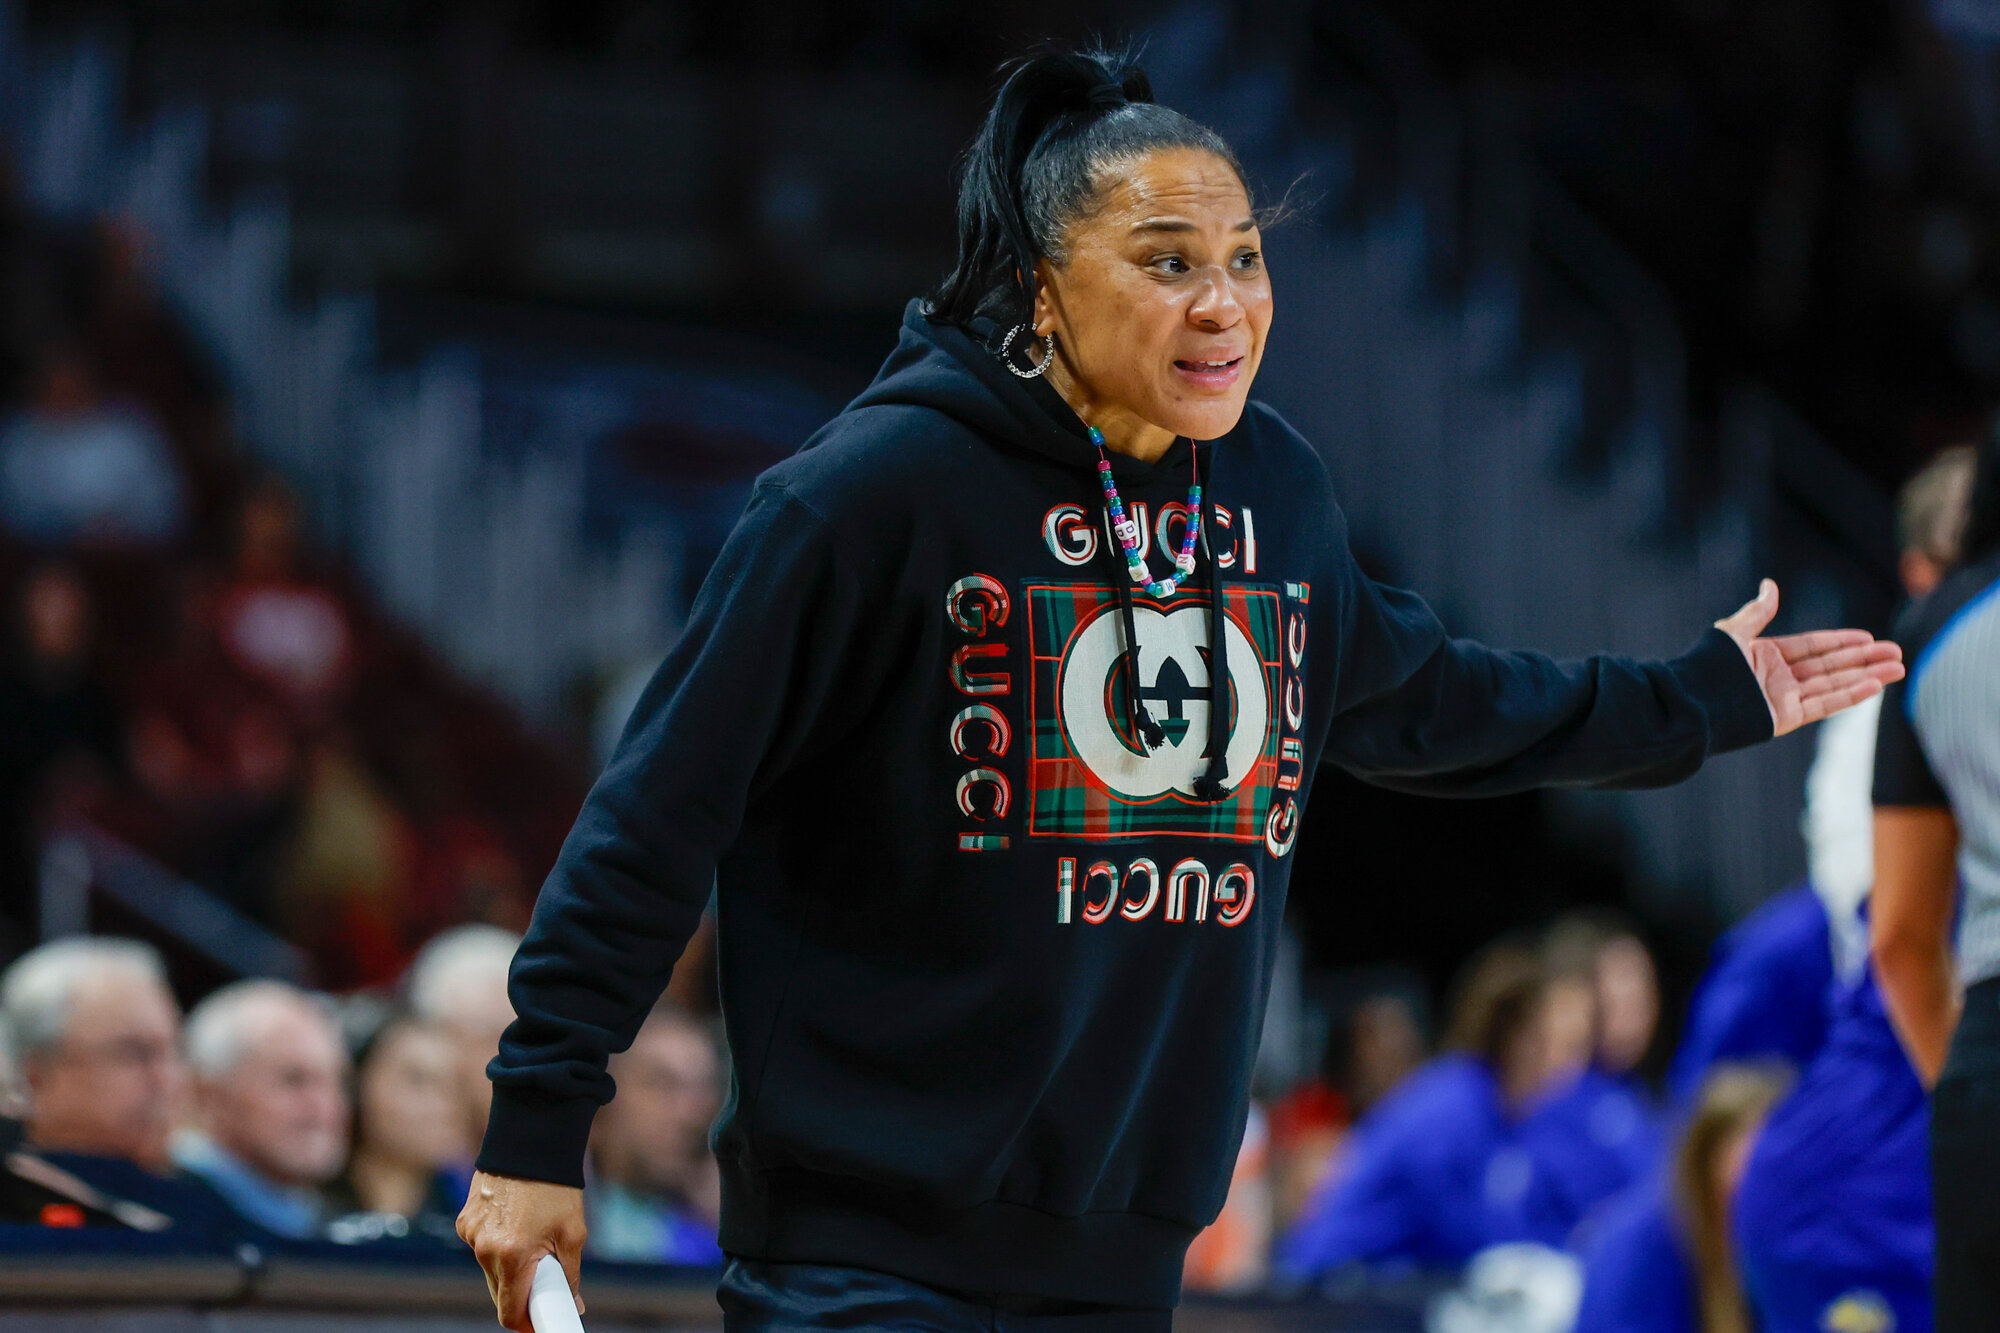 South Carolina head coach Dawn Staley and the Gamecocks have their first ranked road game today as they travel to No. 24 North Carolina.